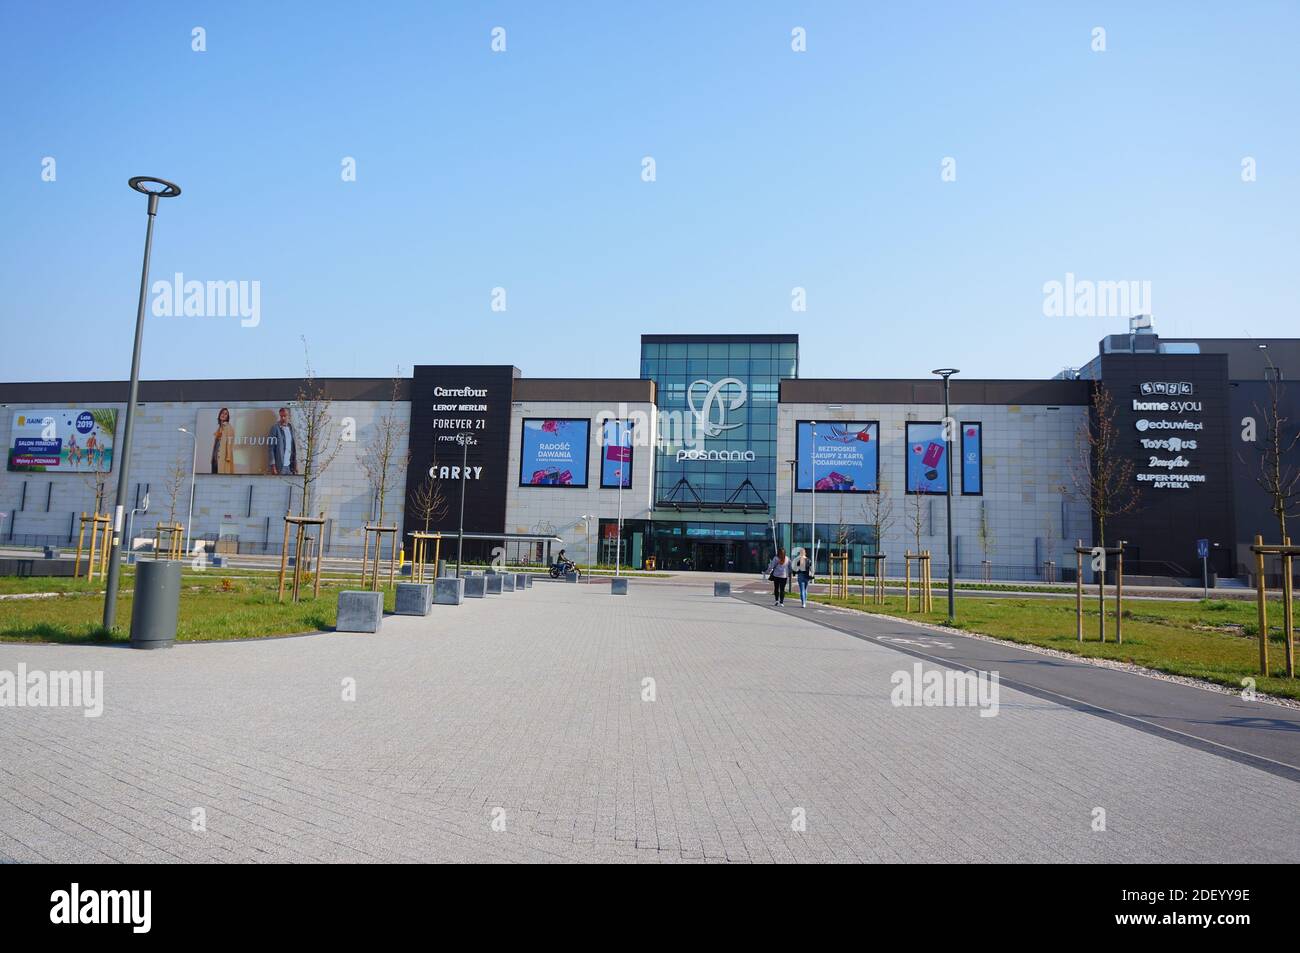 Posnania Shopping Mall High Resolution Stock Photography and Images - Alamy